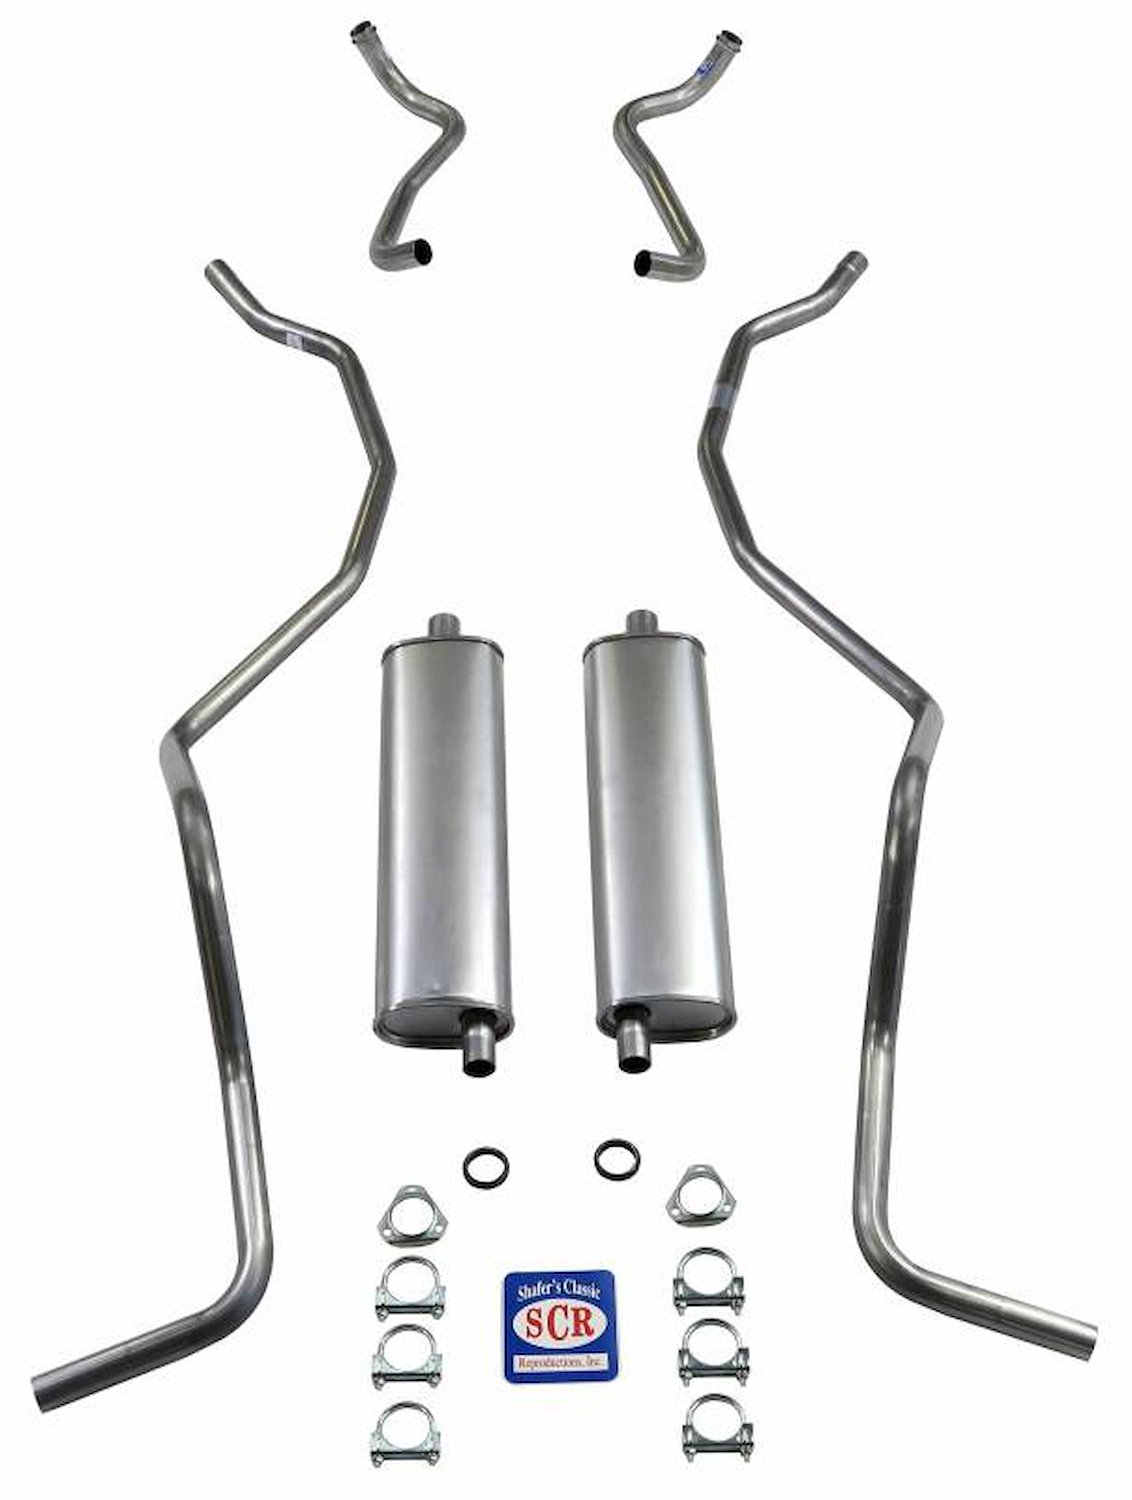 73034S 1960-1961 SW 8-cyl 348 Dual Exhaust & 1960 El Camino Exhaust System, 304 Stainless Steel